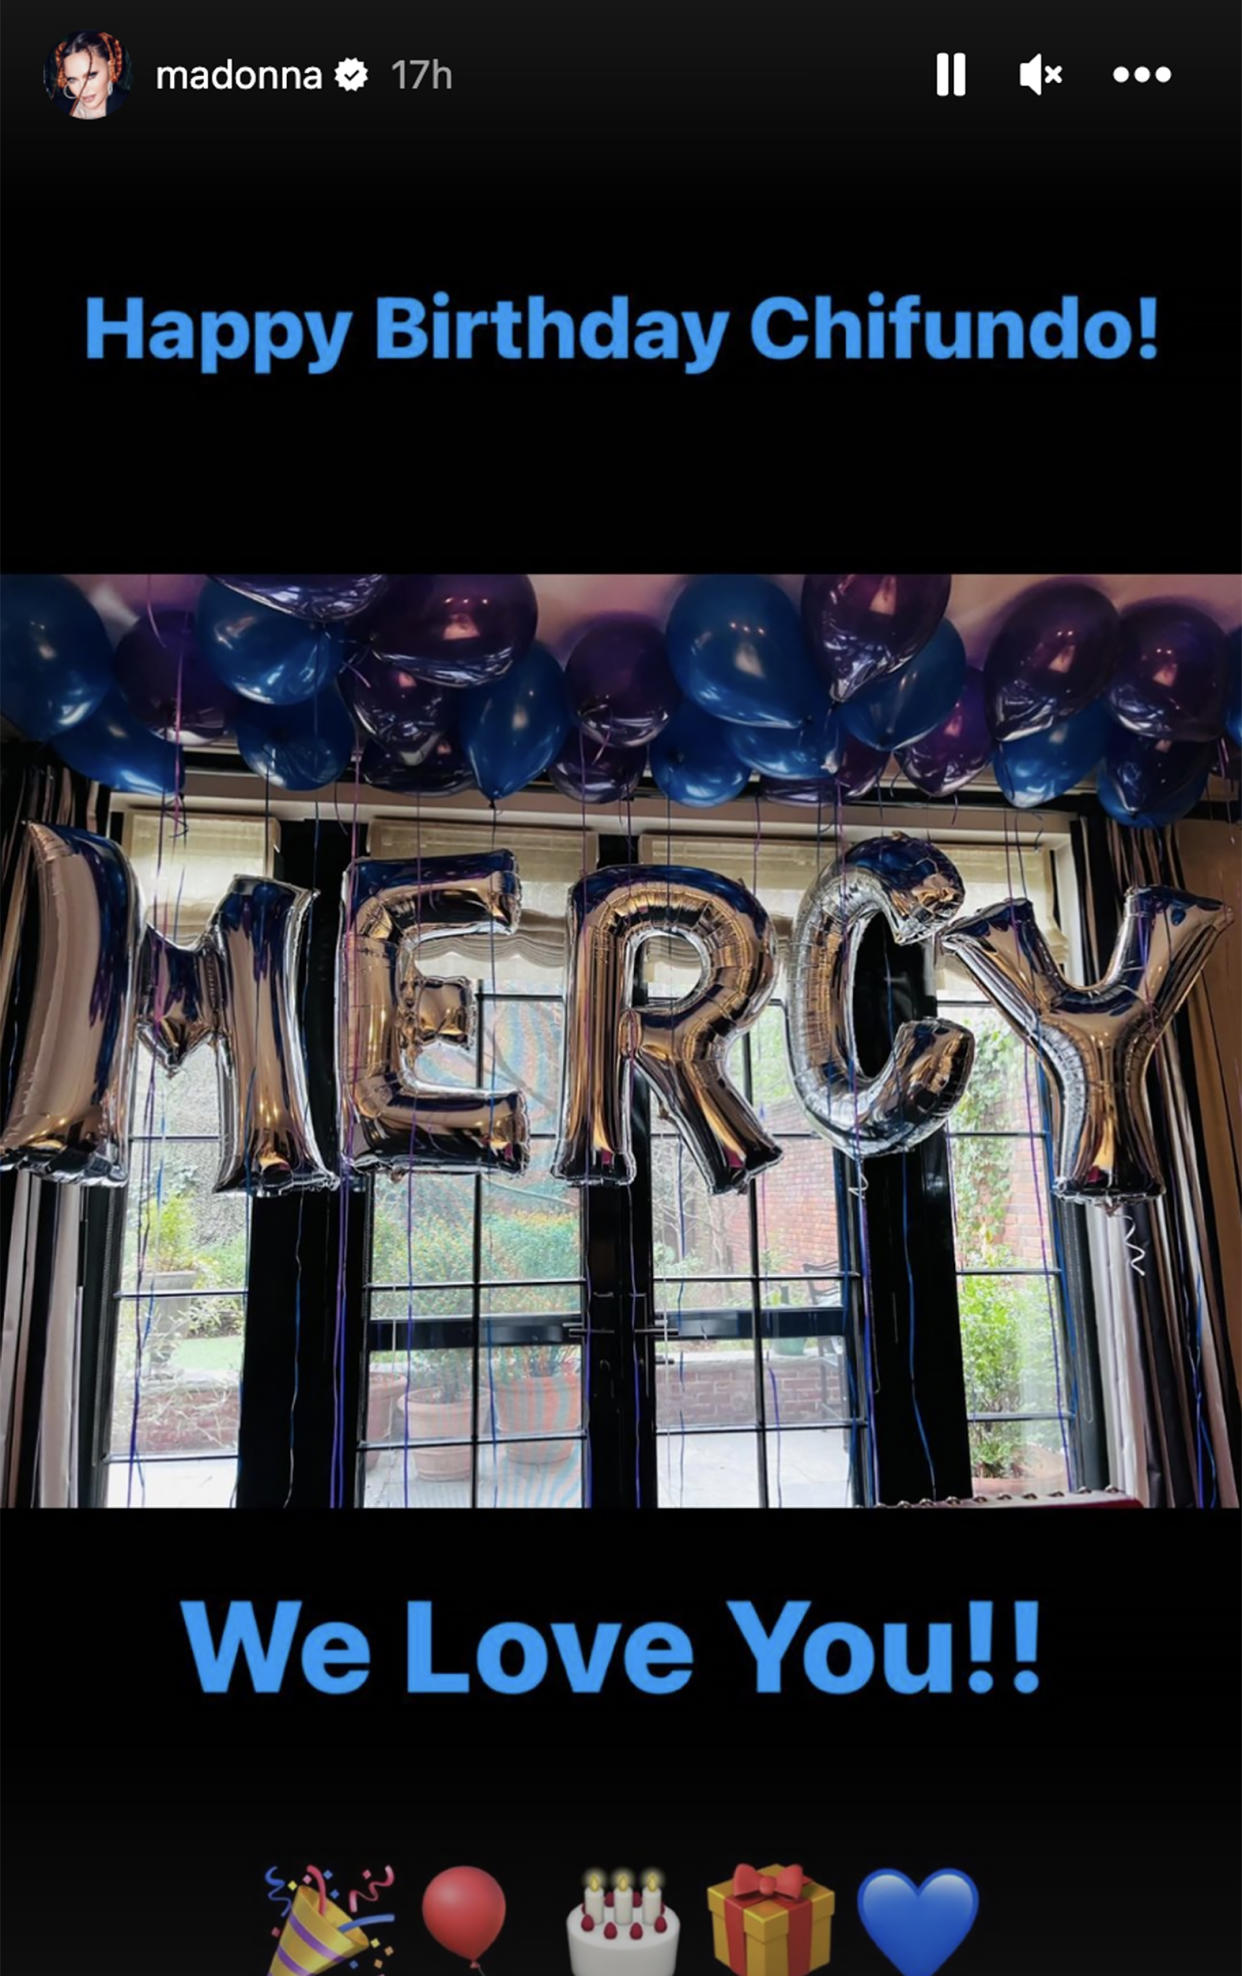 For Mercy James' birthday, Madonna got a balloon arrangement that spelled out her daughter's name. (@madonna via Instagram)